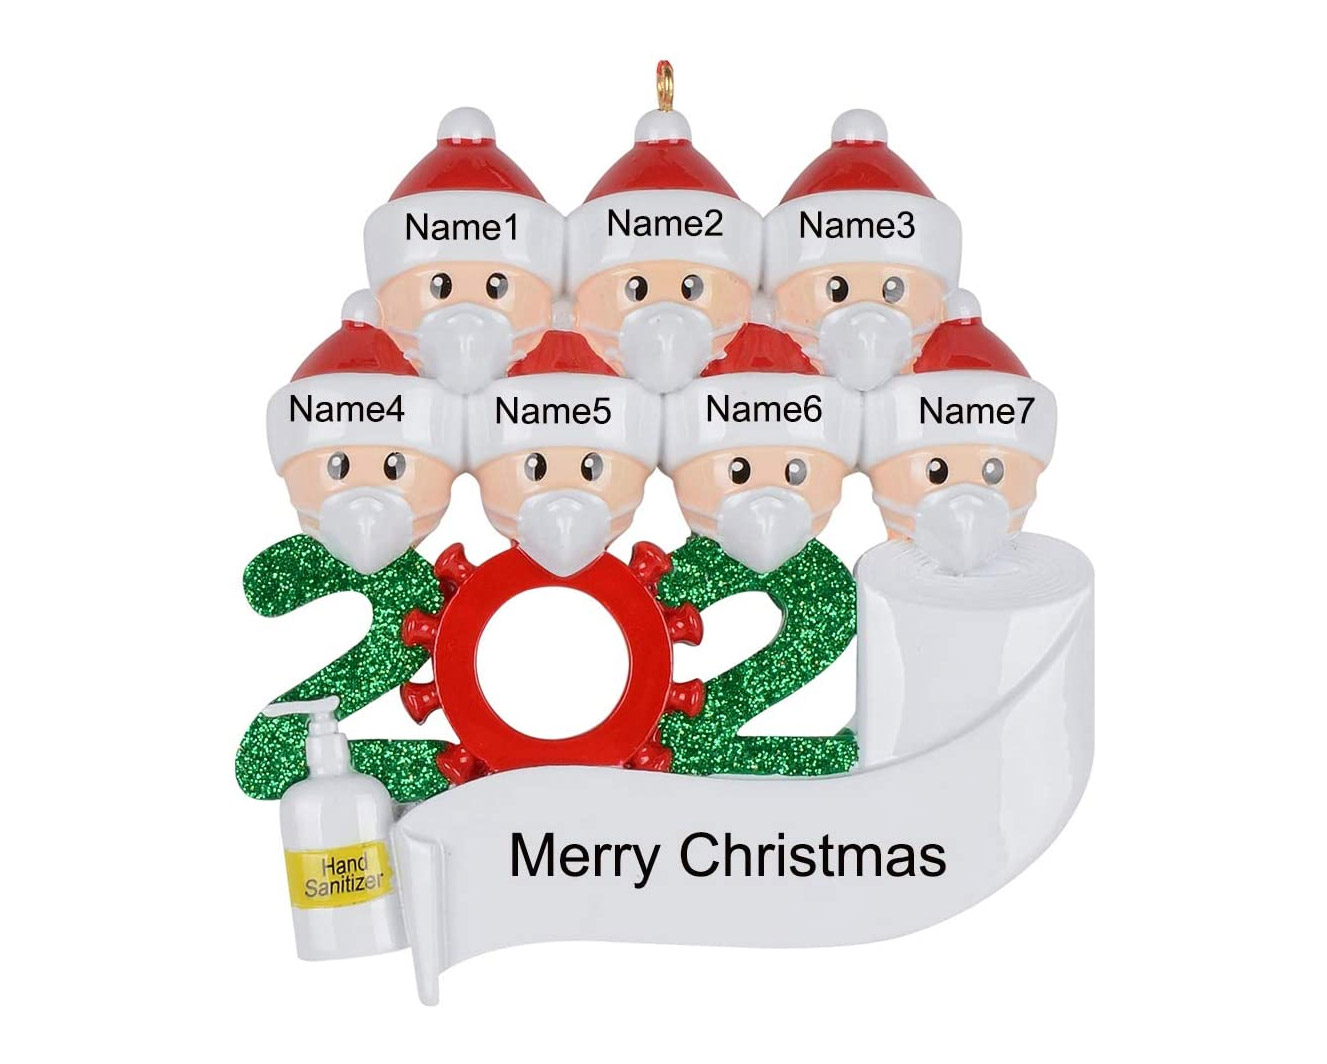 Personalized 2020 Christmas Ornaments Quarantine Family with Masks Hand Sanitizer Toilet Paper Hanging Ornament for Christmas Decorations Tree Home Decor Xmas Gifts Family of 5